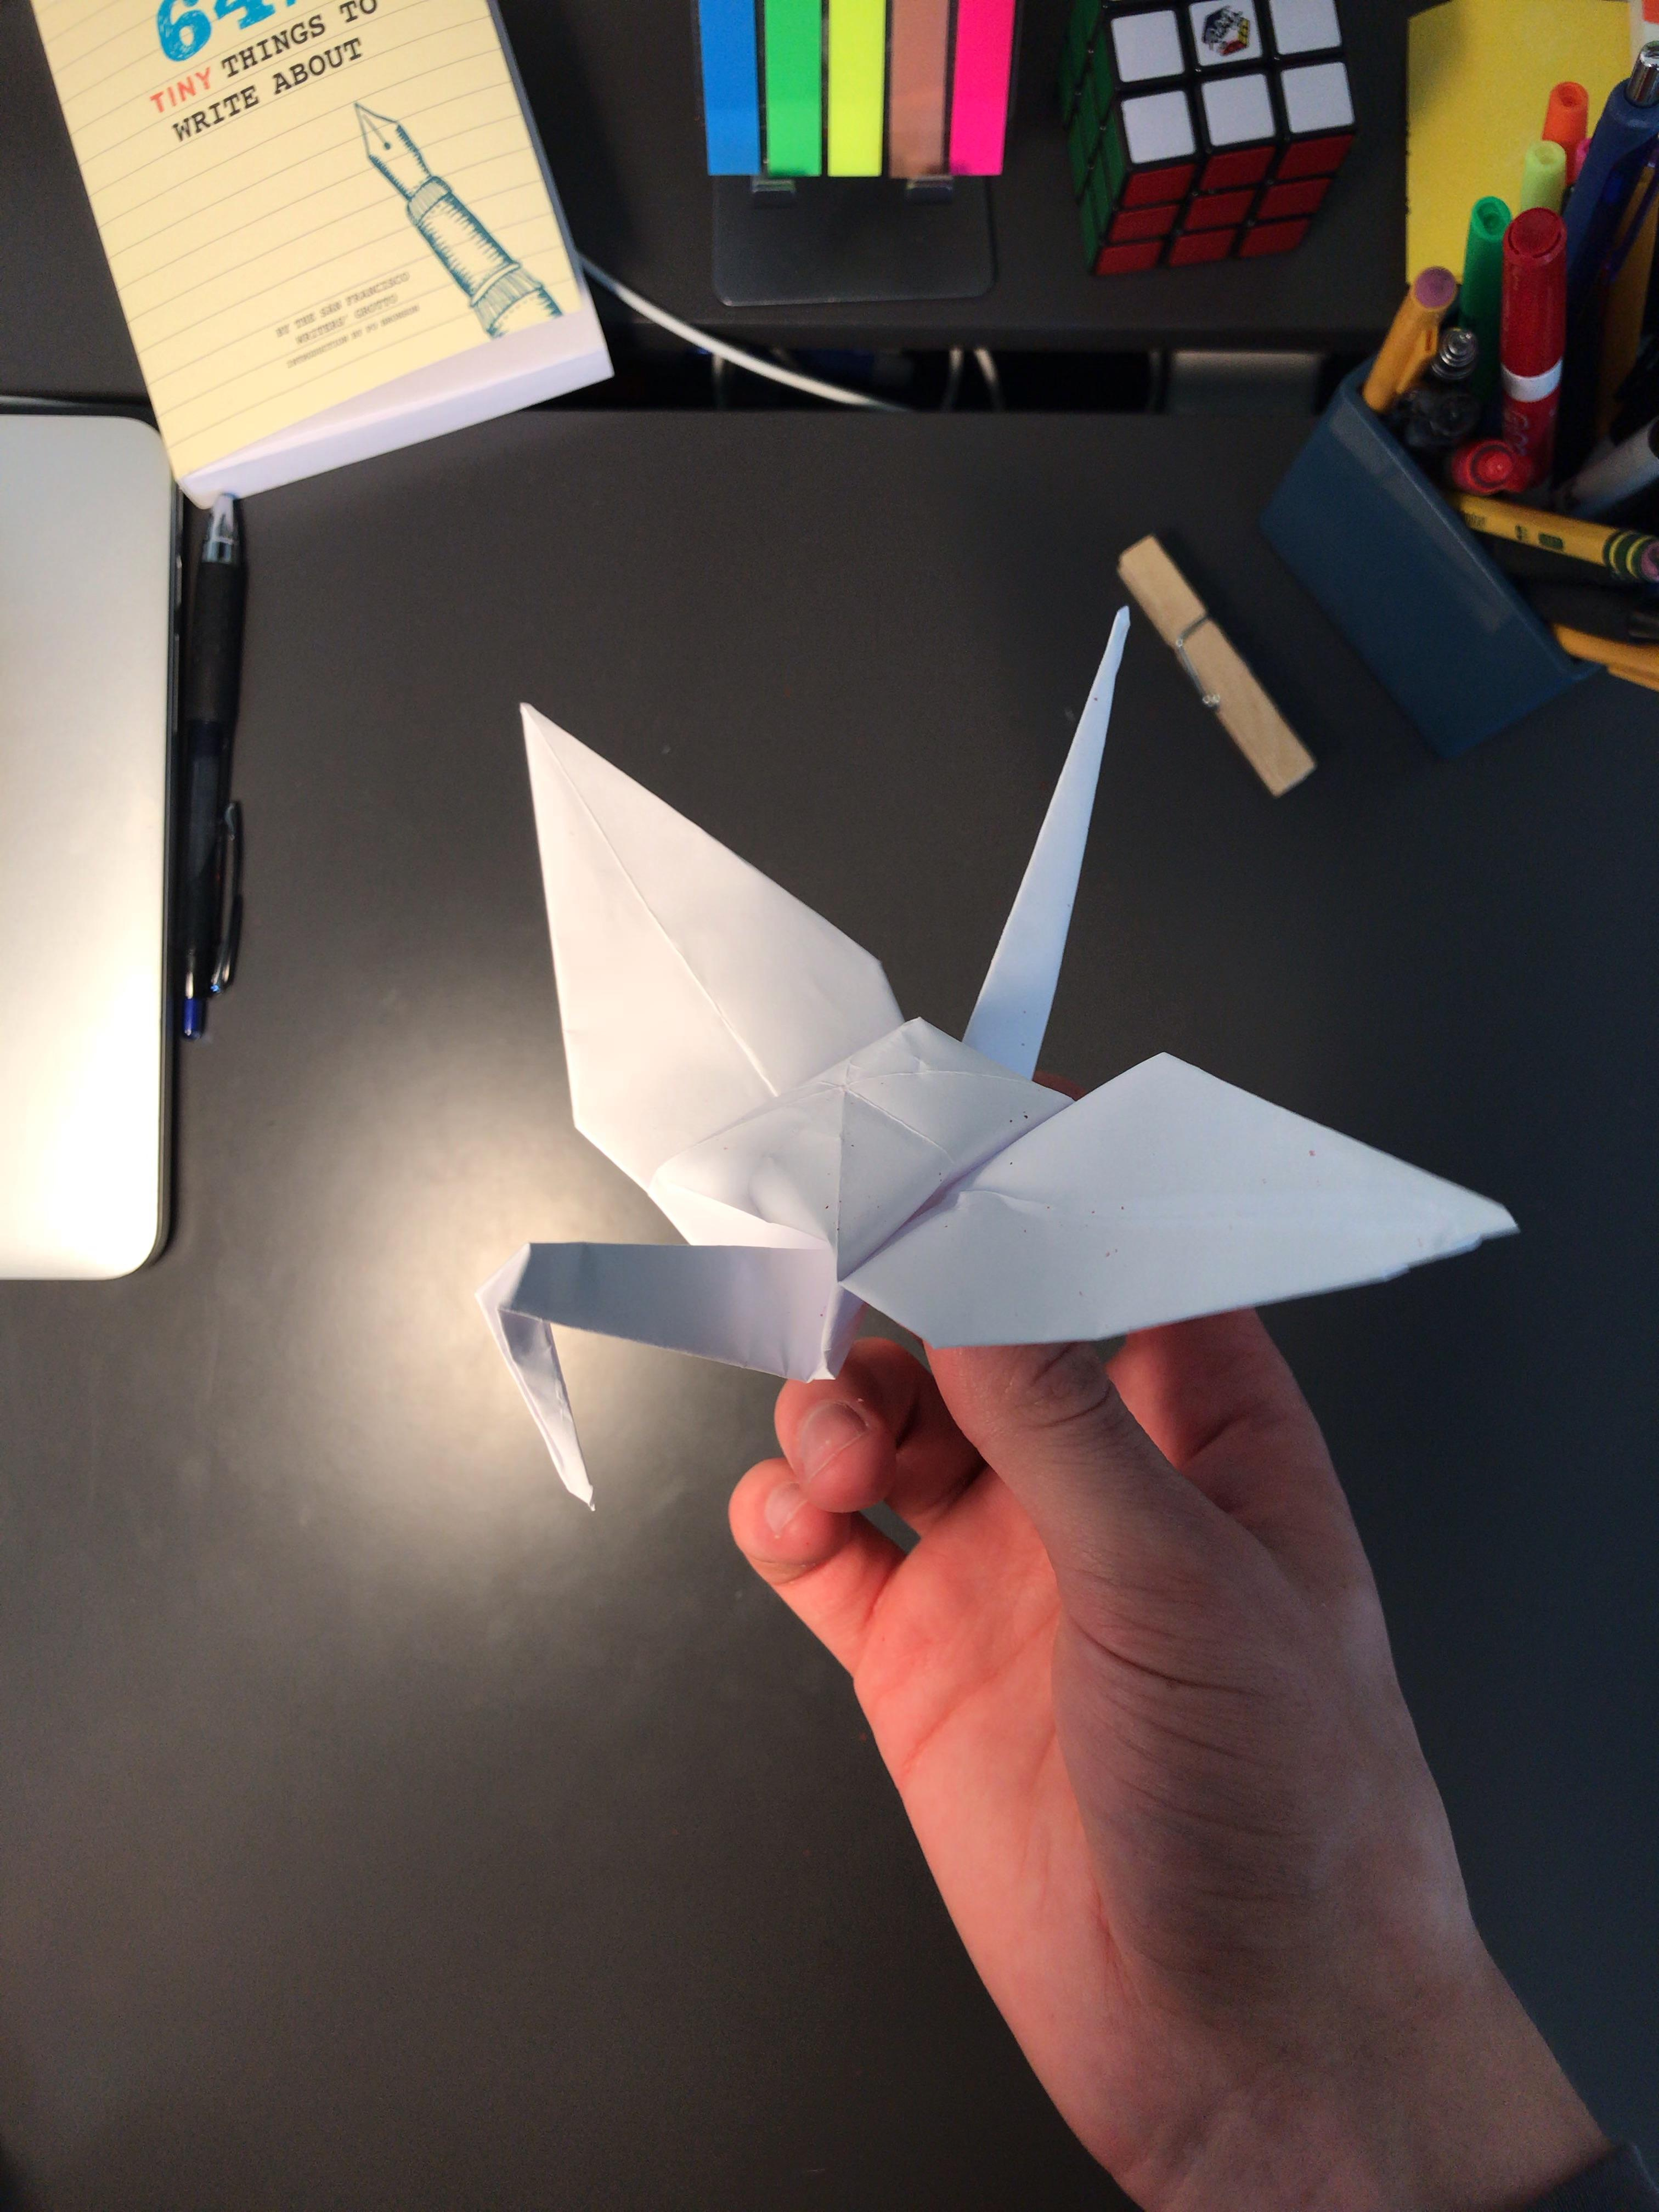 How To Make A Origami 3D Swan How To Make An Origami Swan Out Of Printer Paper Step 27